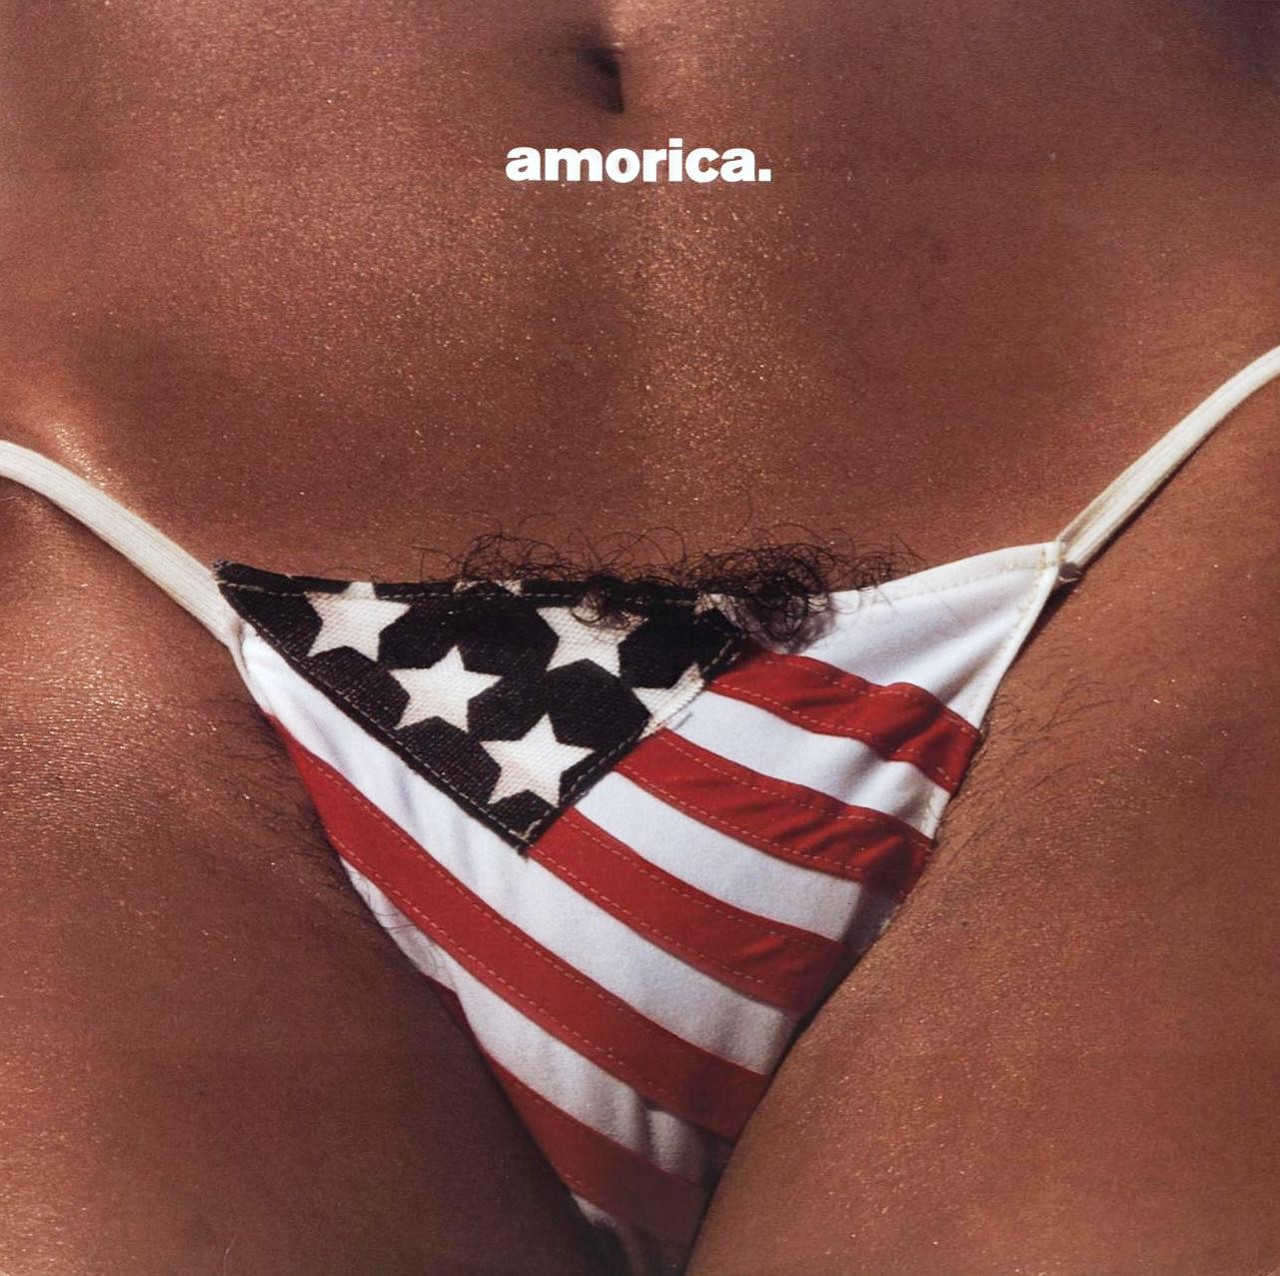 The Black Crowes - Amorica
Ah yes, pubes. Amorica by the Black Crowes was released in 1994, but an alternative cover was also issued to help boost album sales among people who didn't want album-cover pubes in their collection. If you didn't know, it's a take off the 1976 Bicentennial issue of Hustler, Larry Flynt's  free speech vehicle disguised as a magazine for people who love porn.